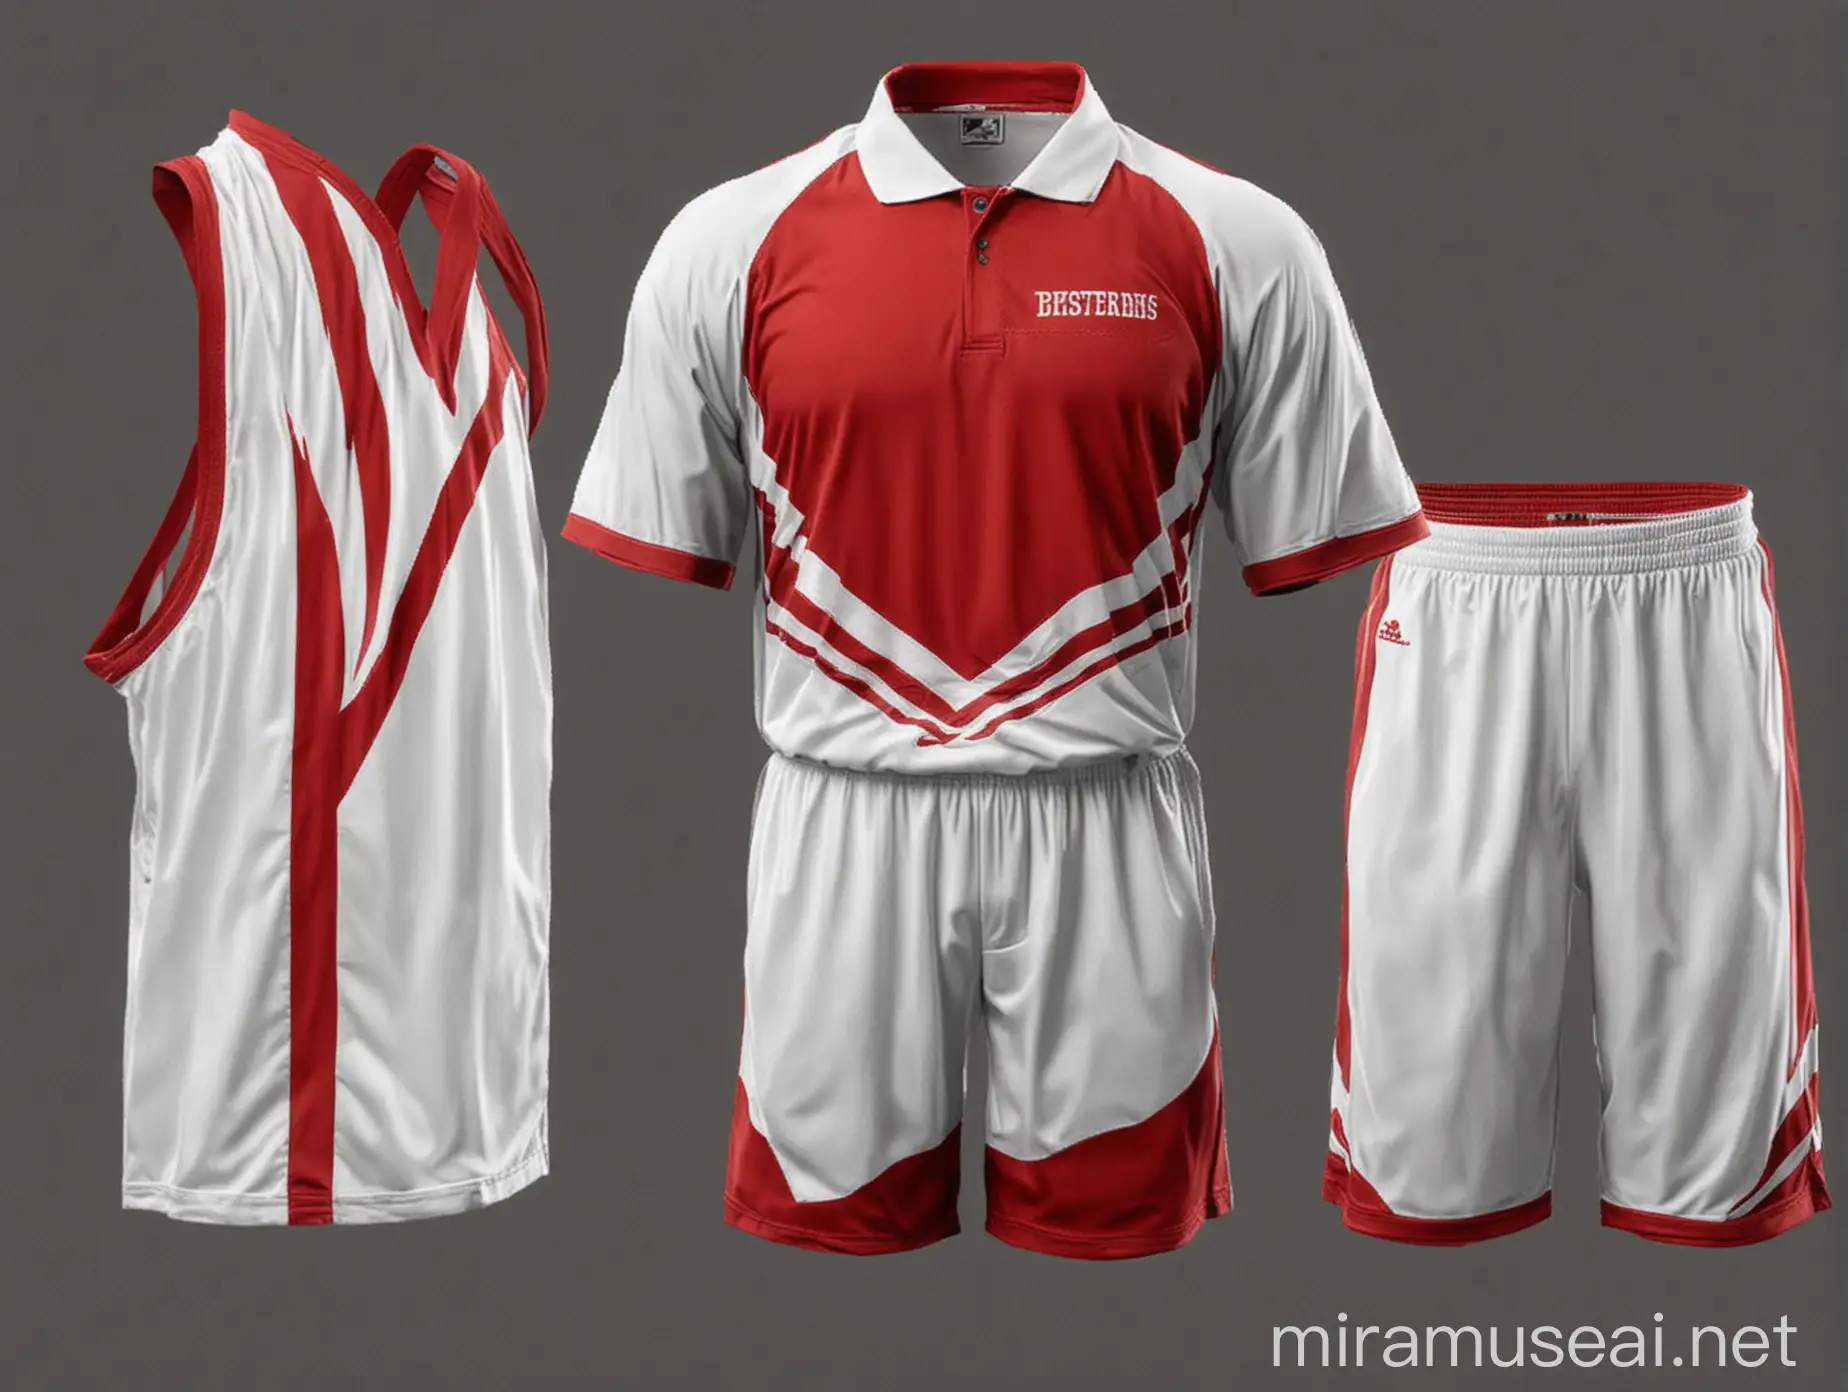 basketball coach uniform with red and white colors